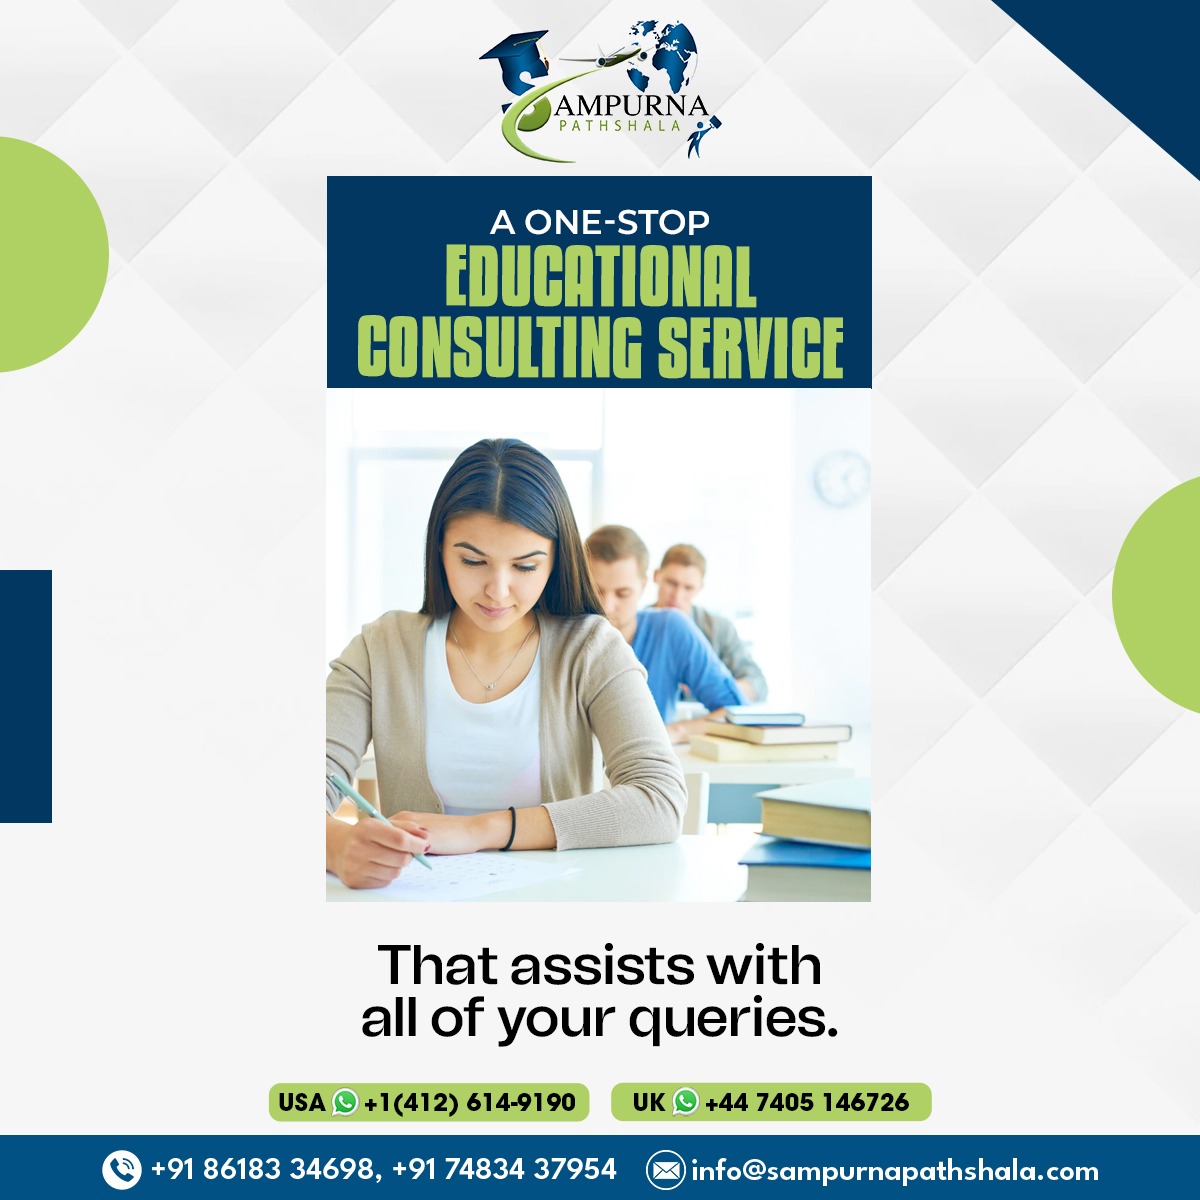 One stop #educationconsultancy service that will assist you all of your quires. We provide a comprehensive range of services to support you through every stage of your educational journey.

Call us to book your free appointment with us at +91 8618334698
.